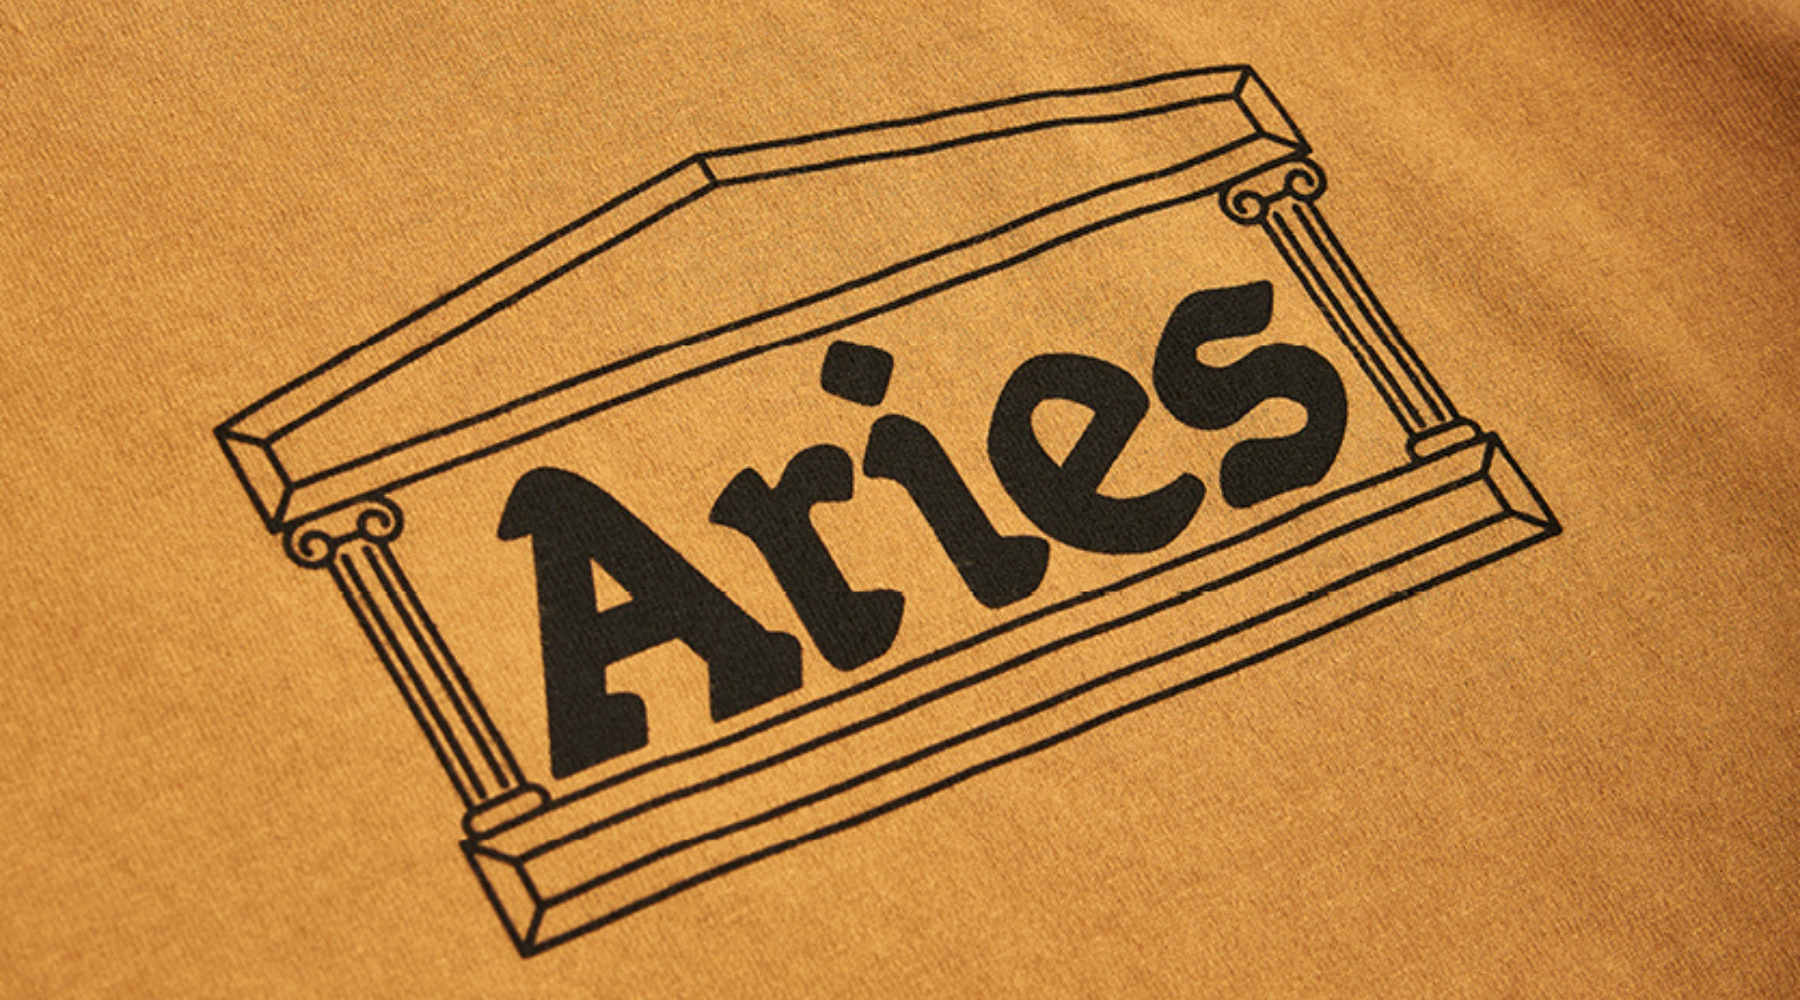 About Aries Brand, Read Our Feature